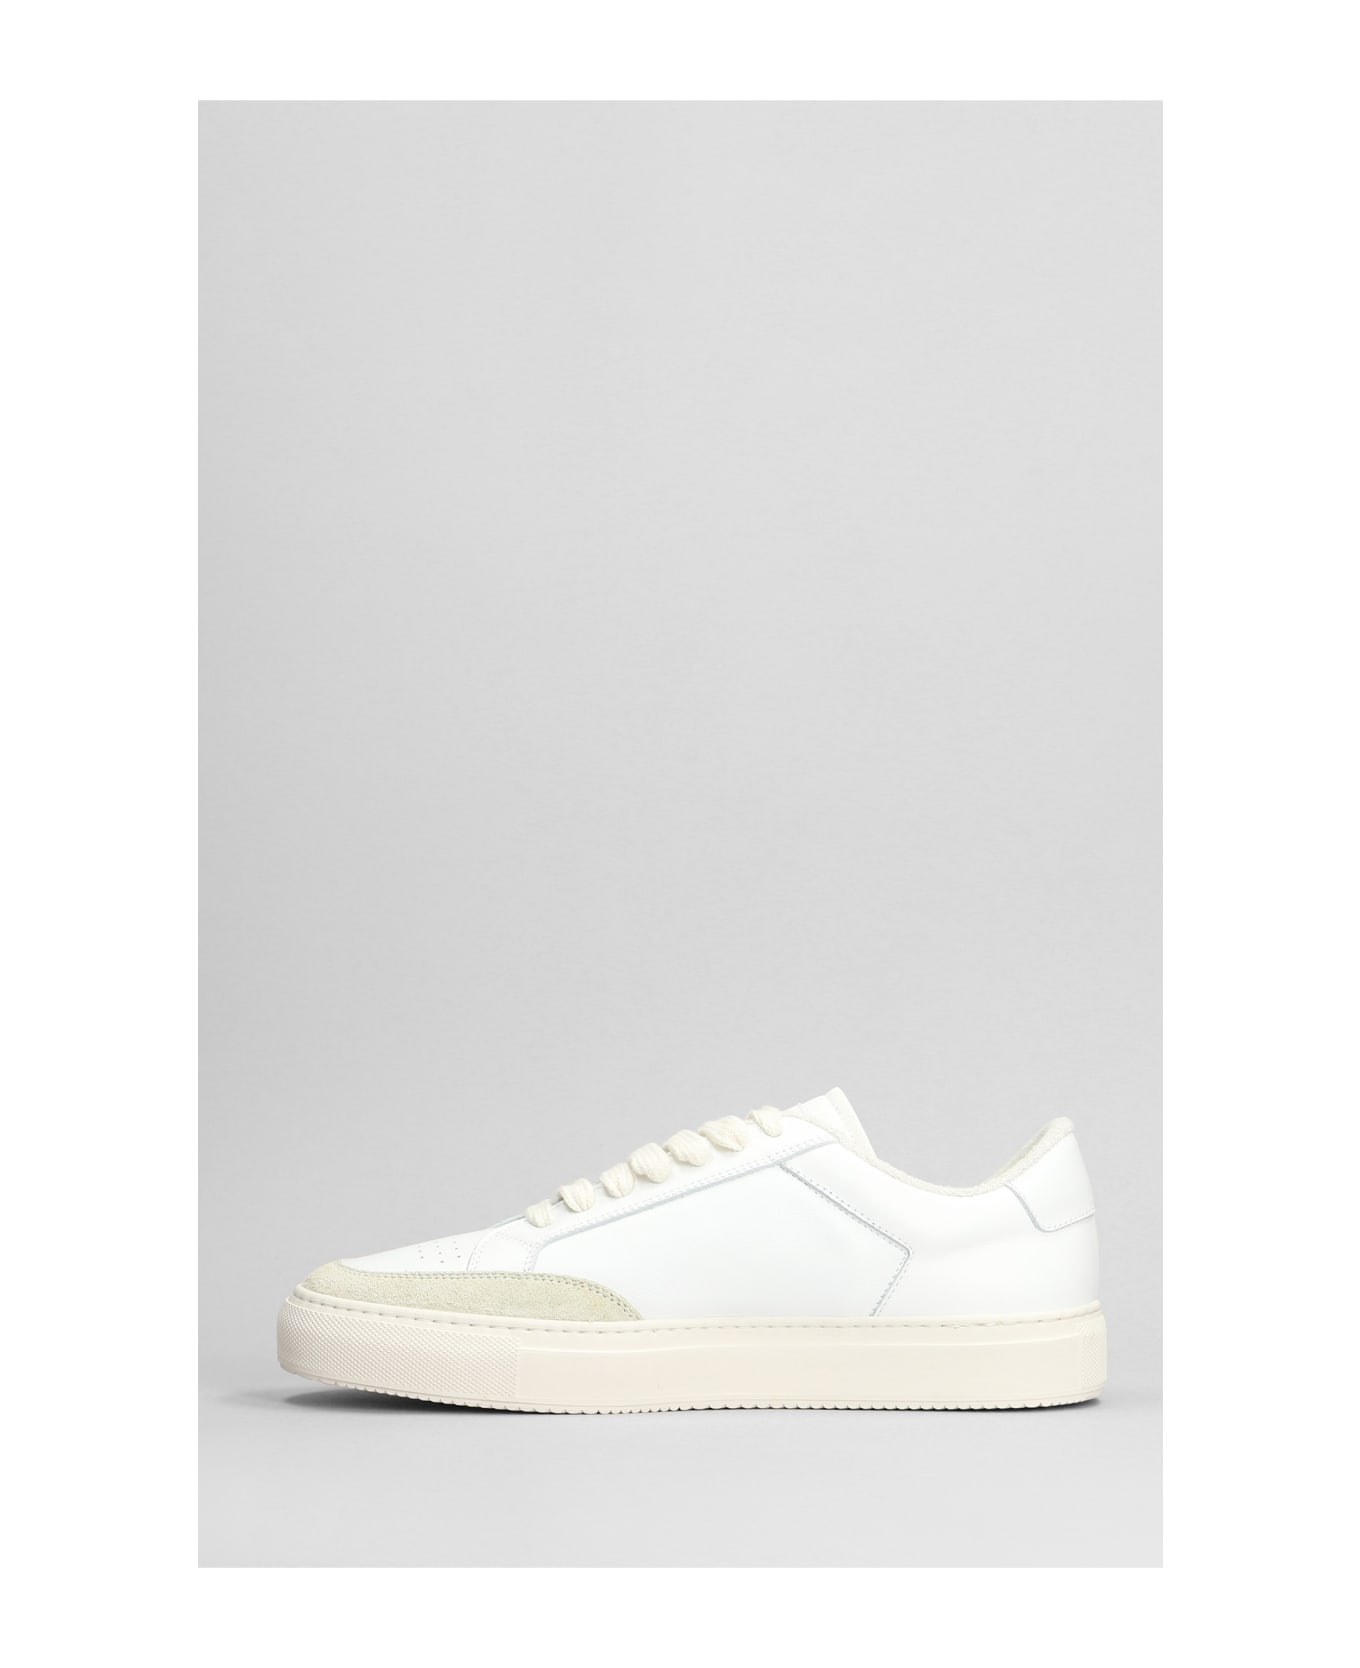 Common Projects Tennis Pro Sneakers In White Leather - White スニーカー